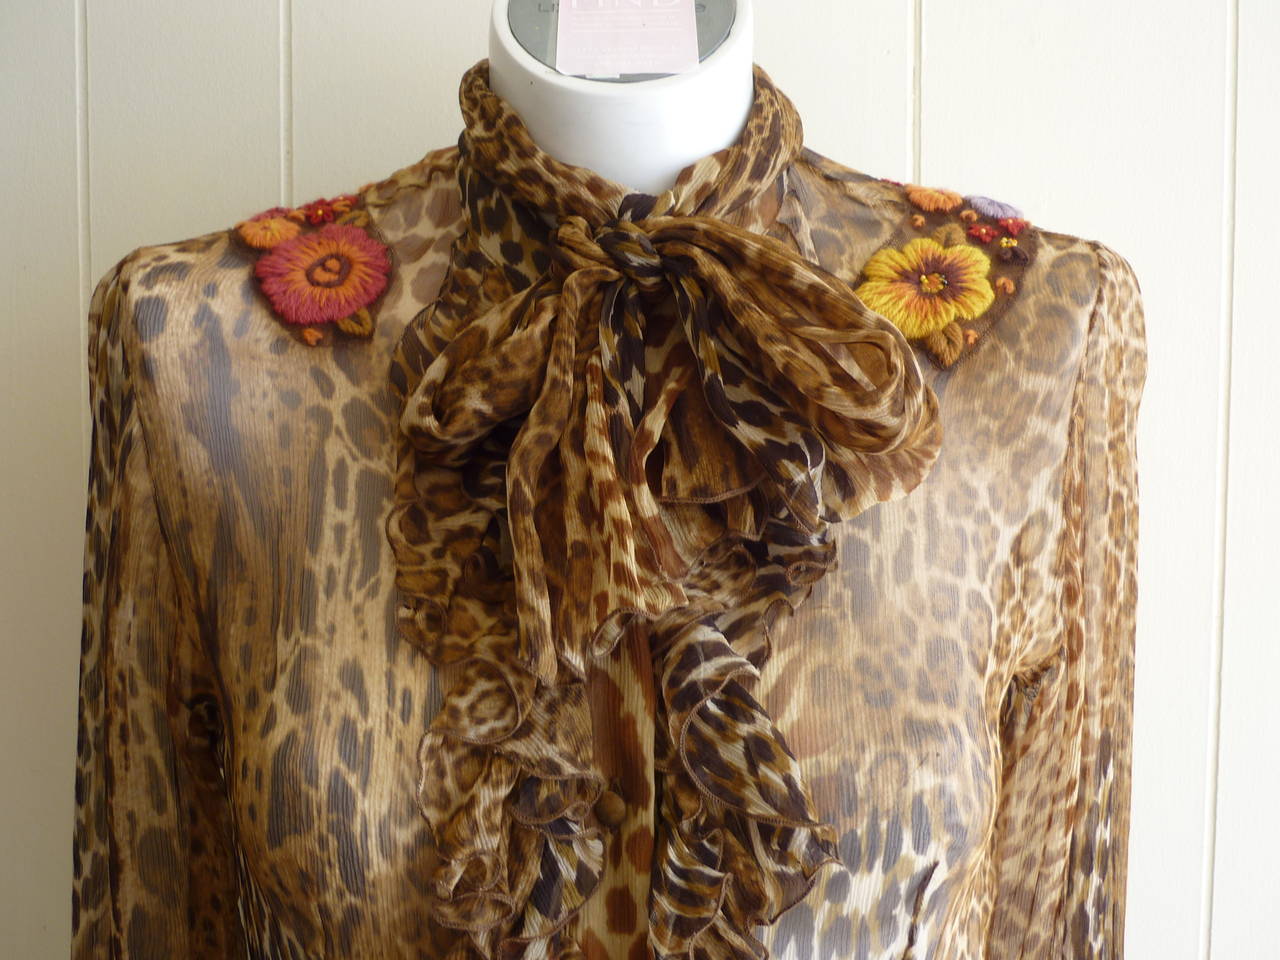 This leopard print silk chiffon blouse as great floral embroidery detail of wool on mesh on both shoulders, as well as ruffles down the front and an attached scarf.

The covered buttons are found down the front of the blouse and on the cuffs.